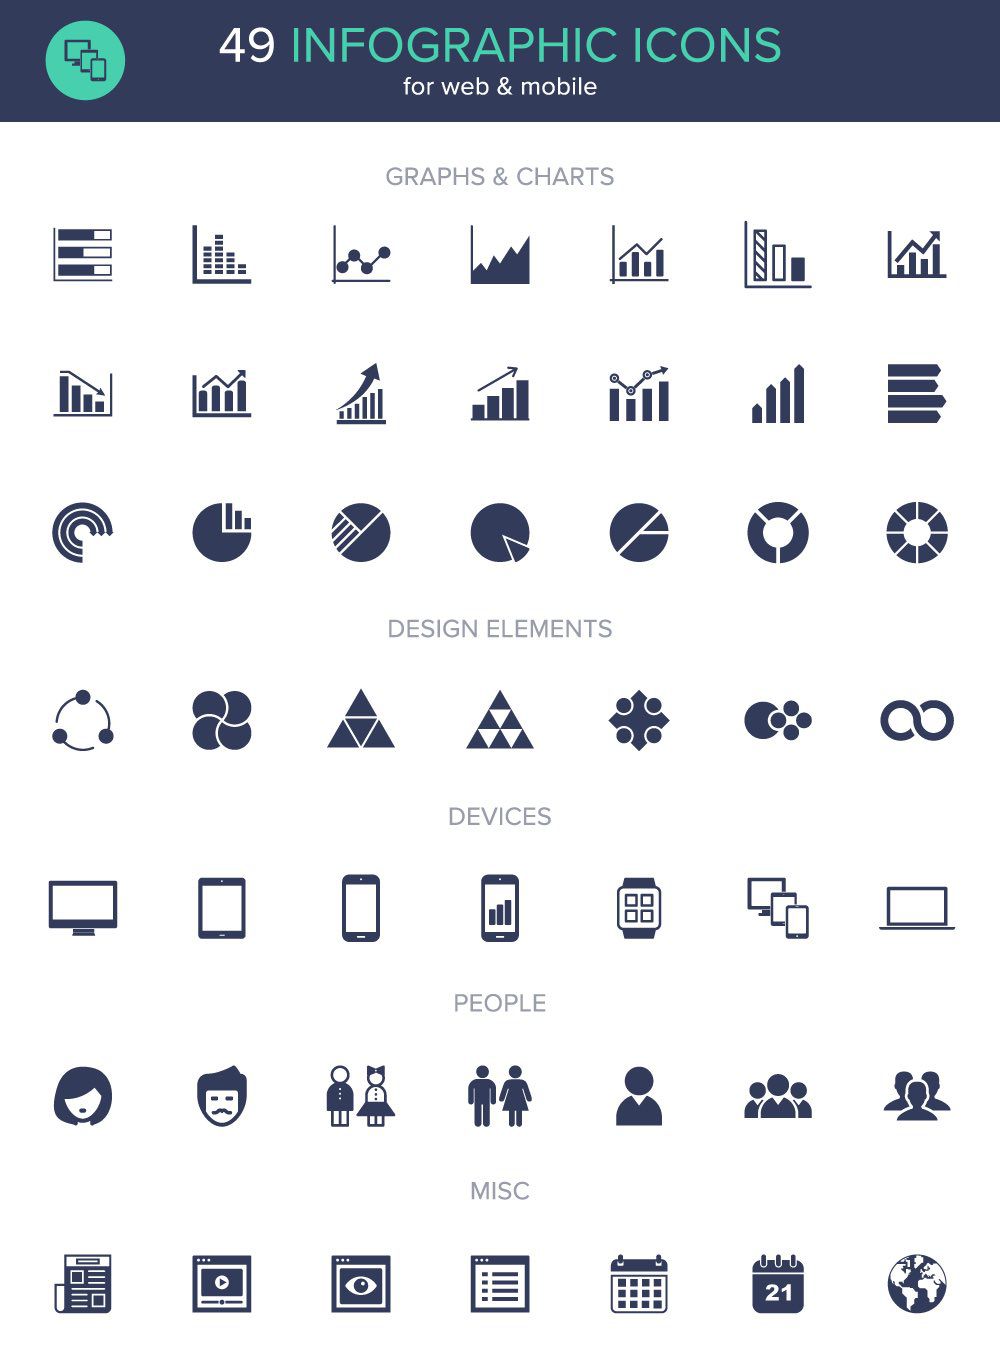 19 infographic icon packs - Vector icon packs - SVG, PSD, PNG, EPS 